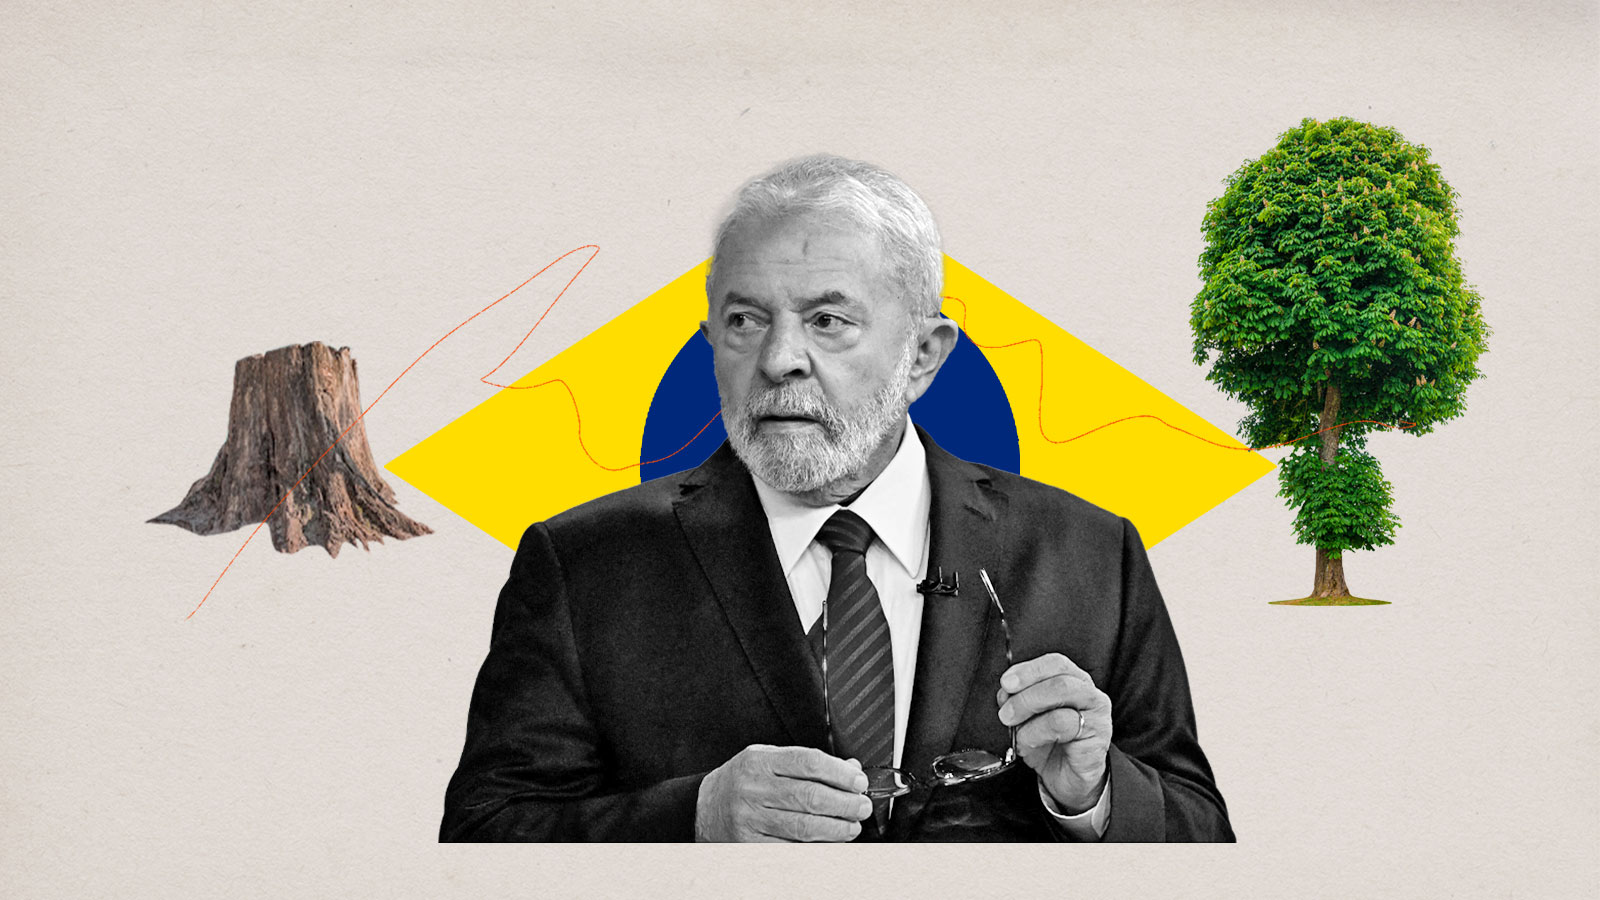 Collage: President of Brazil Luiz Inácio Lula da Silva with yellow diamond and blue circle from Brazil flag behind him; a tree and tree stump on either side